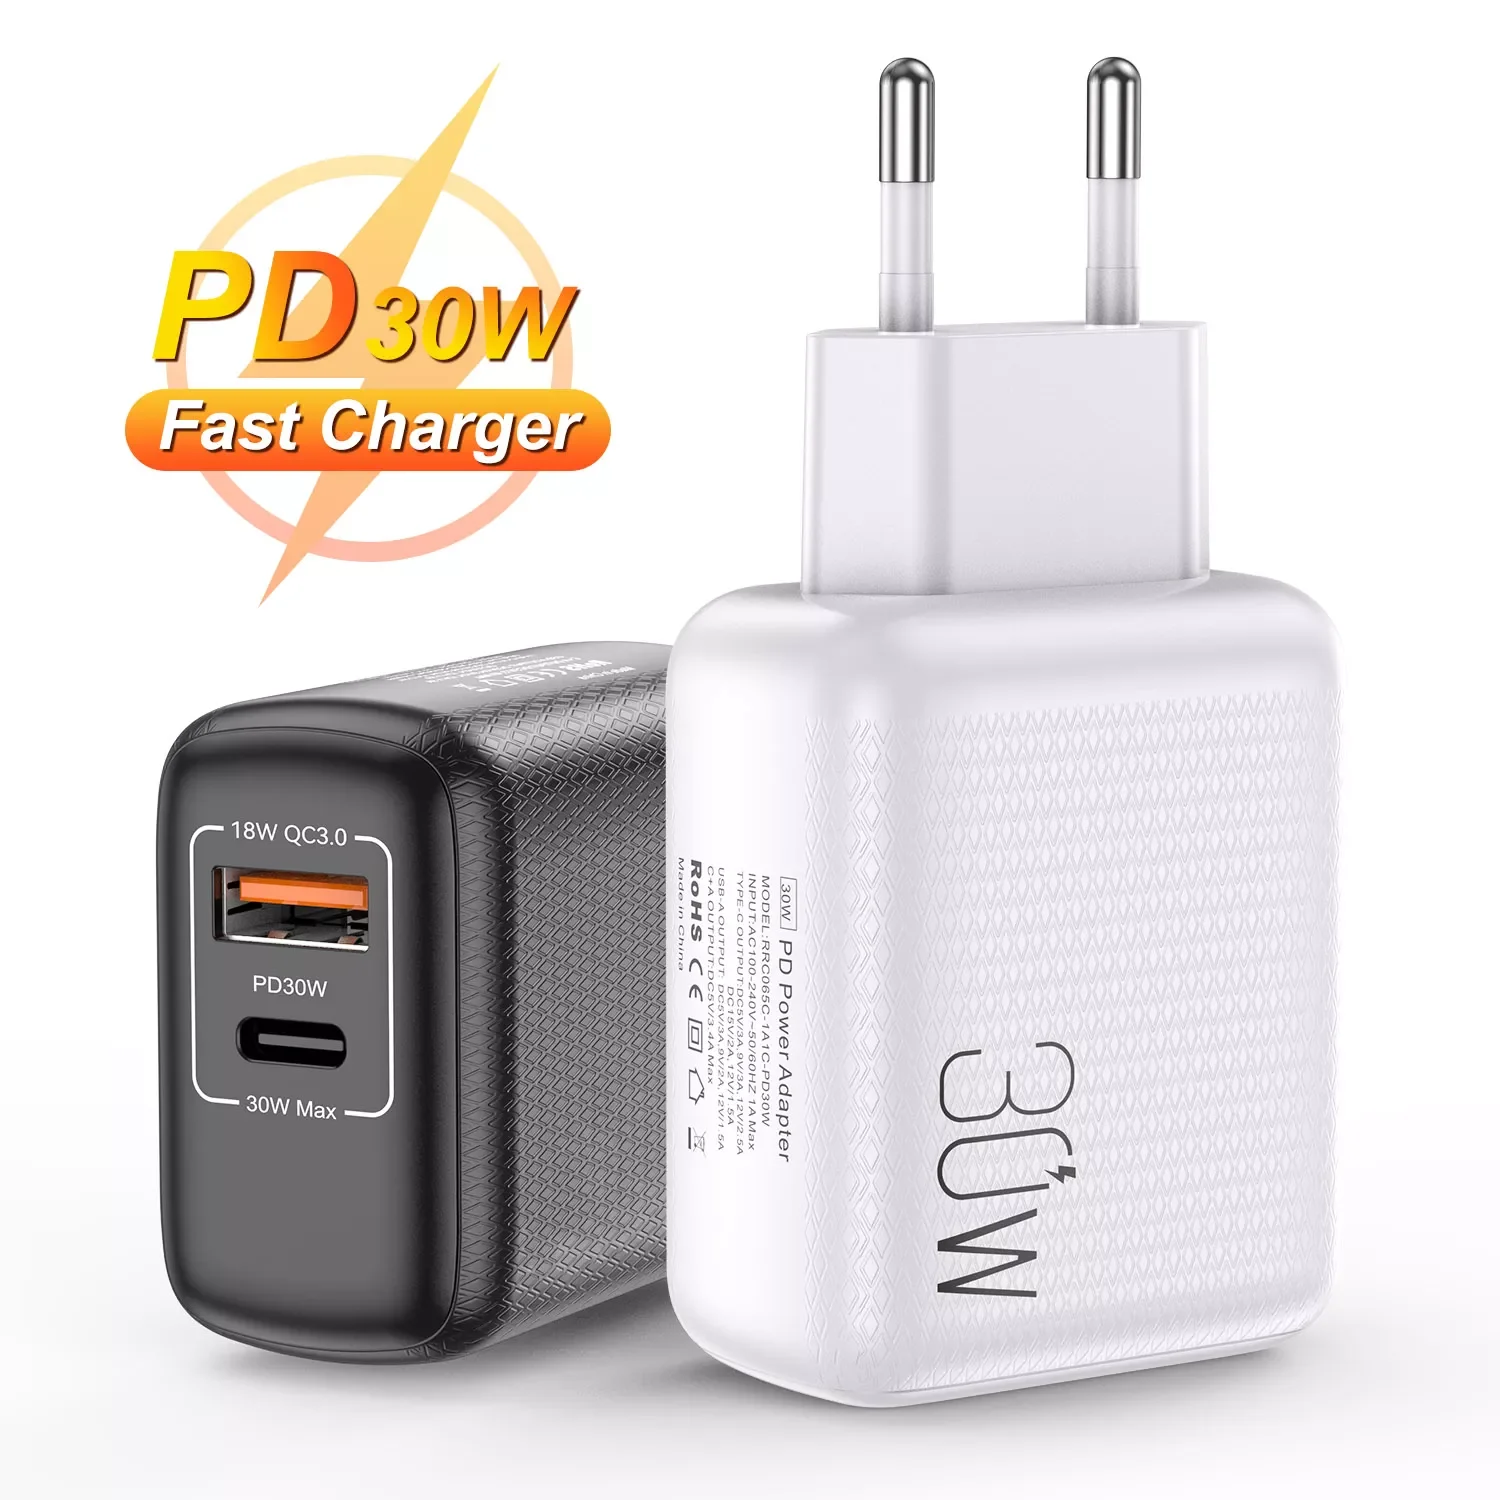 

2 Ports 30W USB Type C Quick Charge 3.0 QC PD Phone Charger QC3.0 18W PD3.0 Fast Charger For iPhone 13 12 Pro Max Mi 11